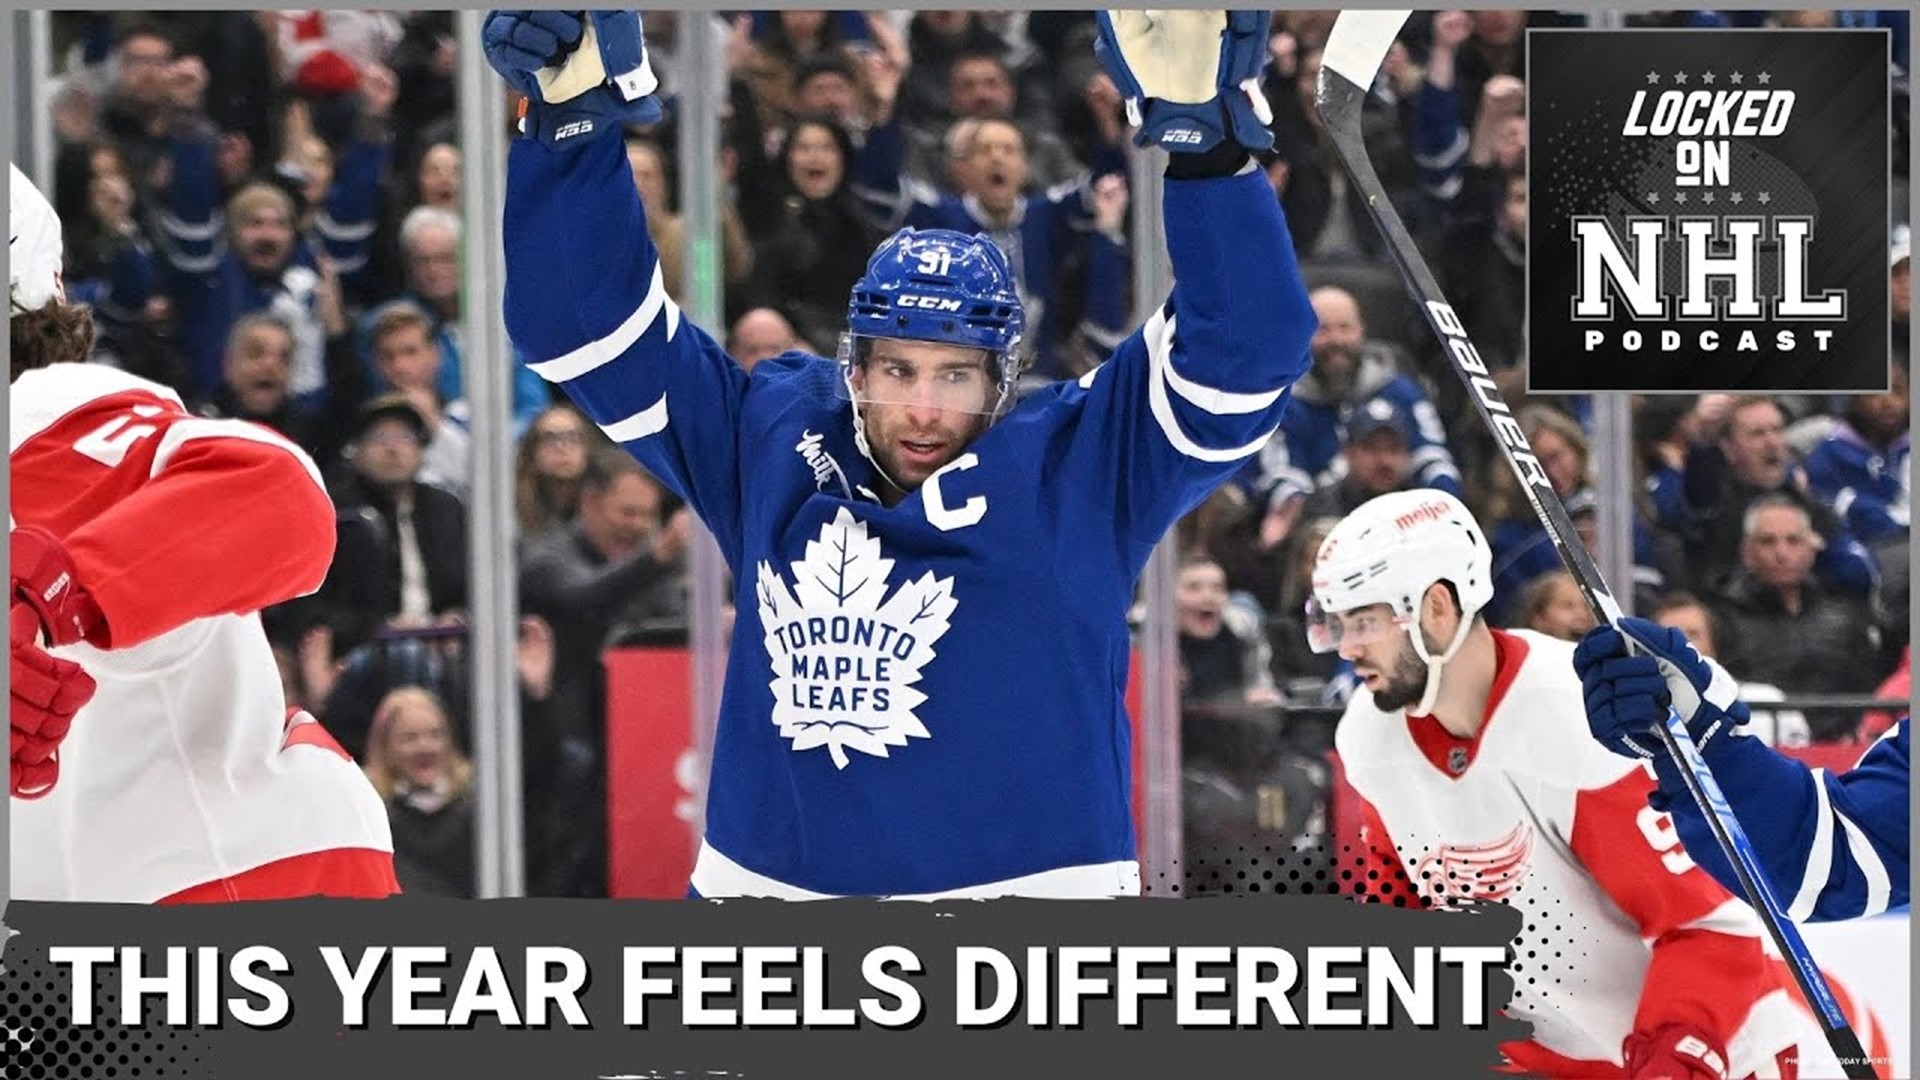 Will Advertising Become the Norm on NHL Jerseys? Let's Hope Not